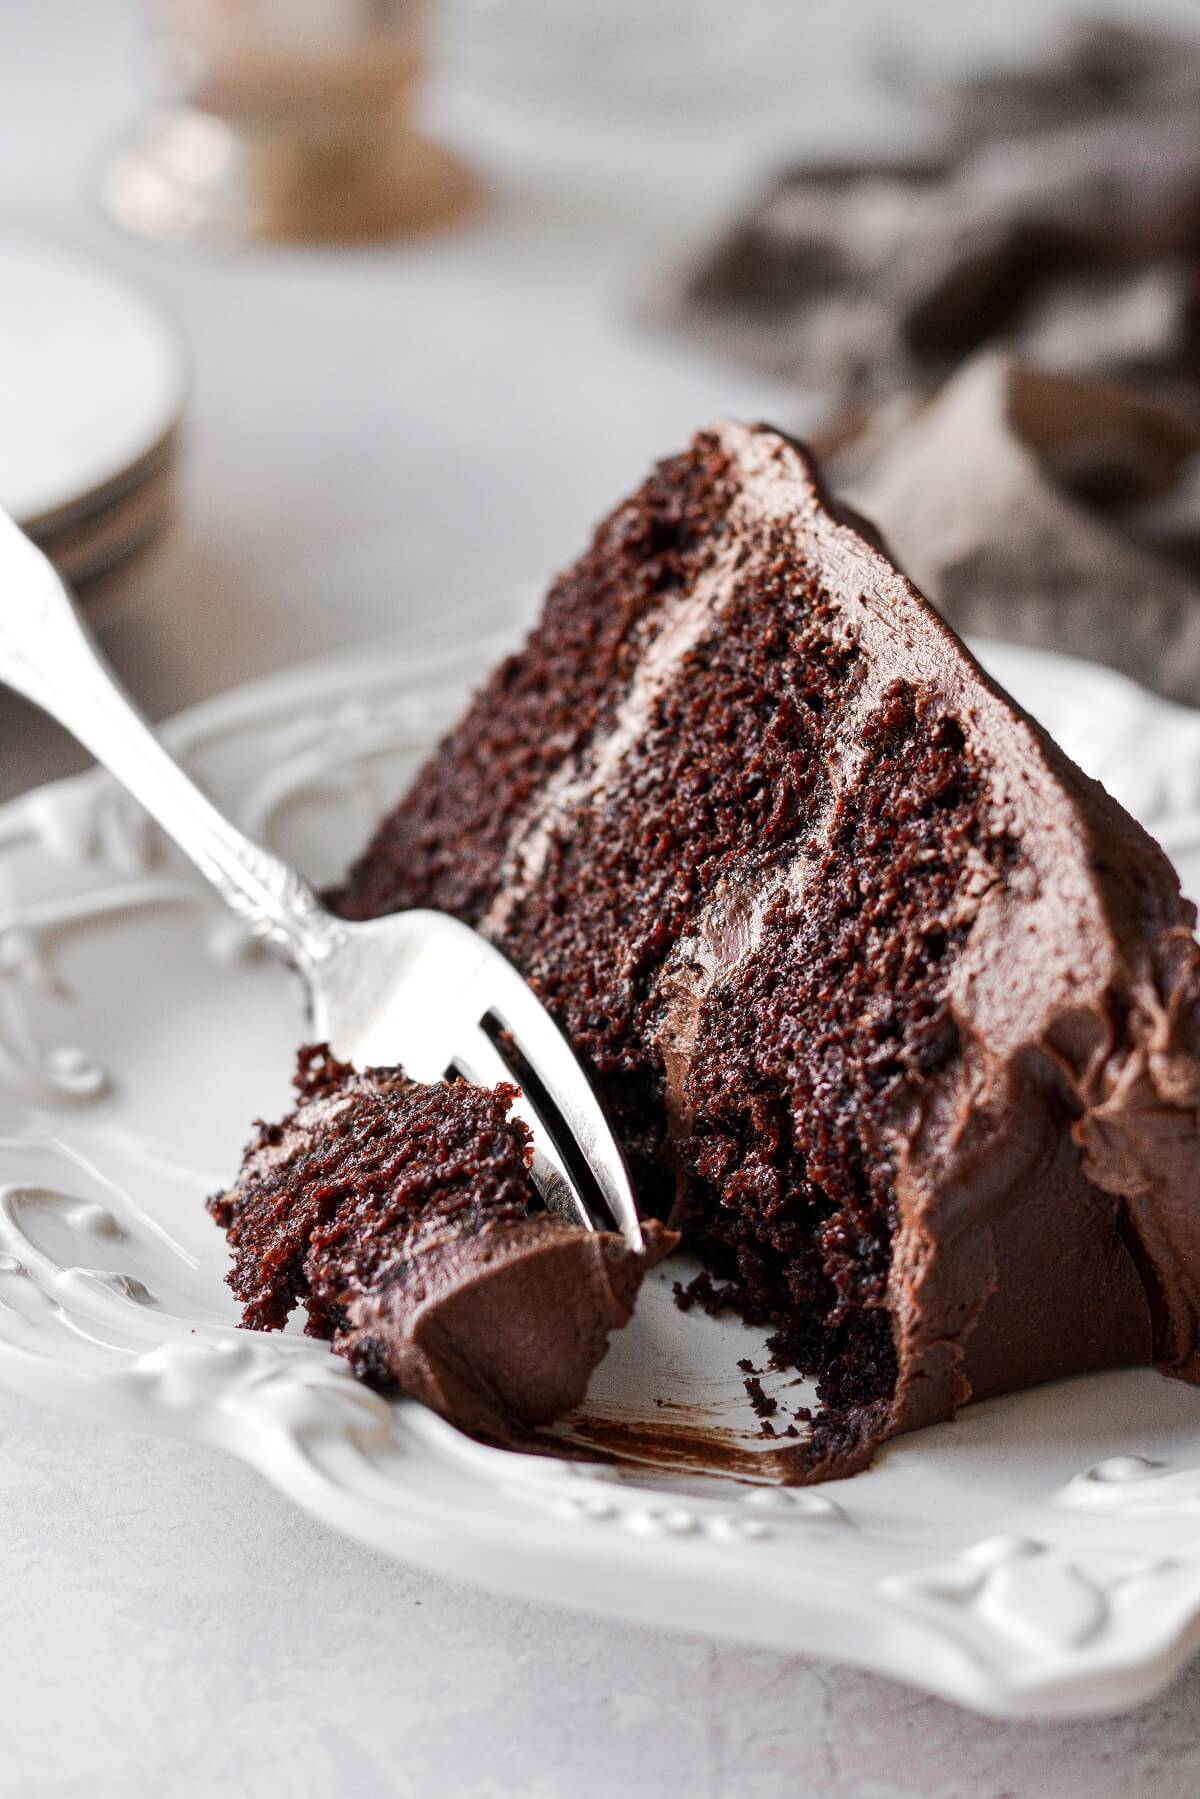 A slice of chocolate cake with chocolate buttercream.